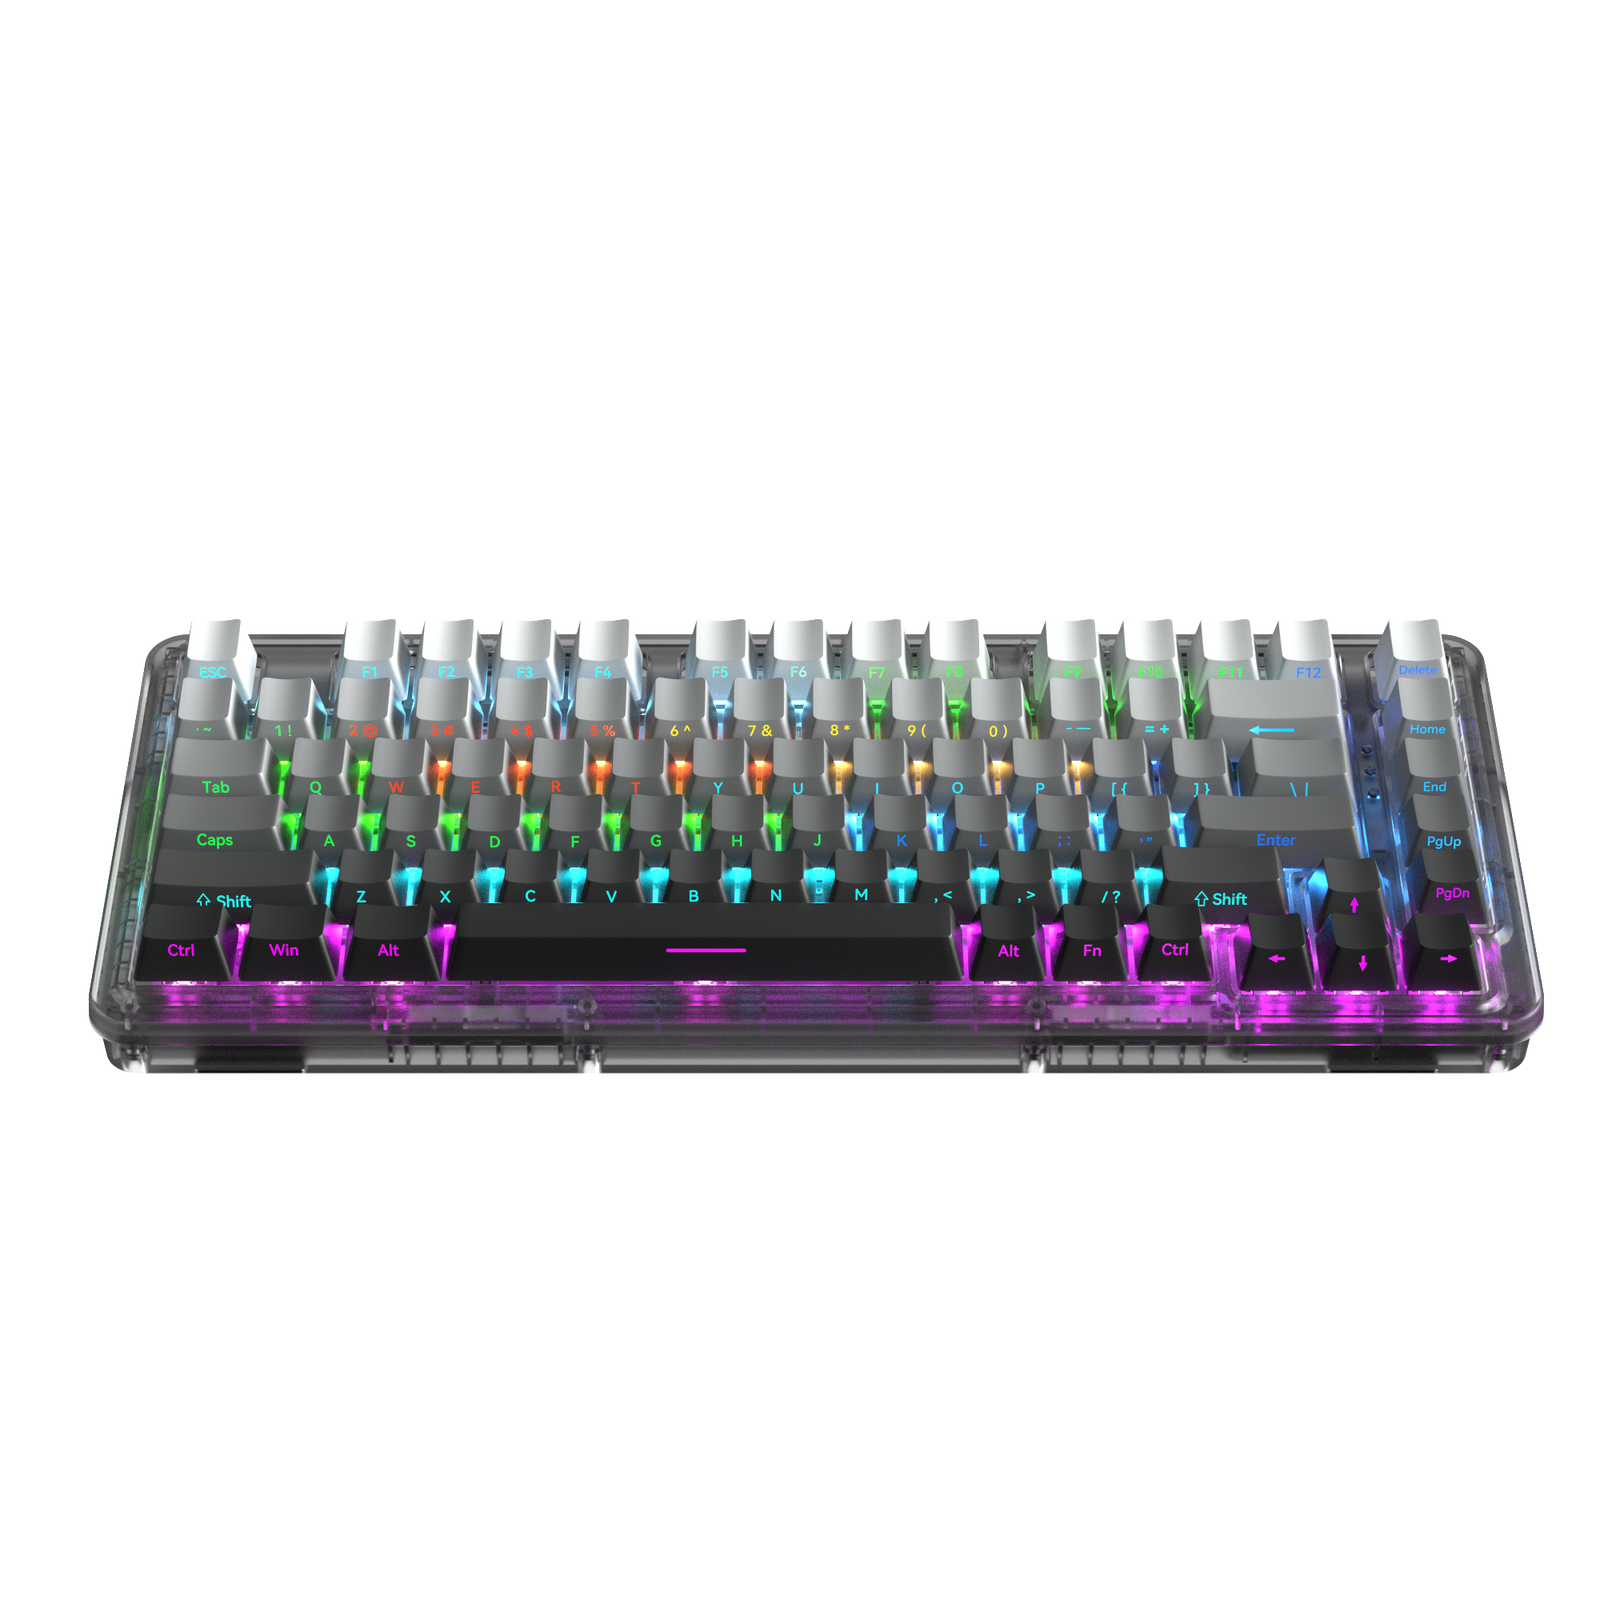 [In Stock] ZT82 Tri-Mode Wireless Full RGB Hot-Swappable Pre-Built Mechanical Keyboard